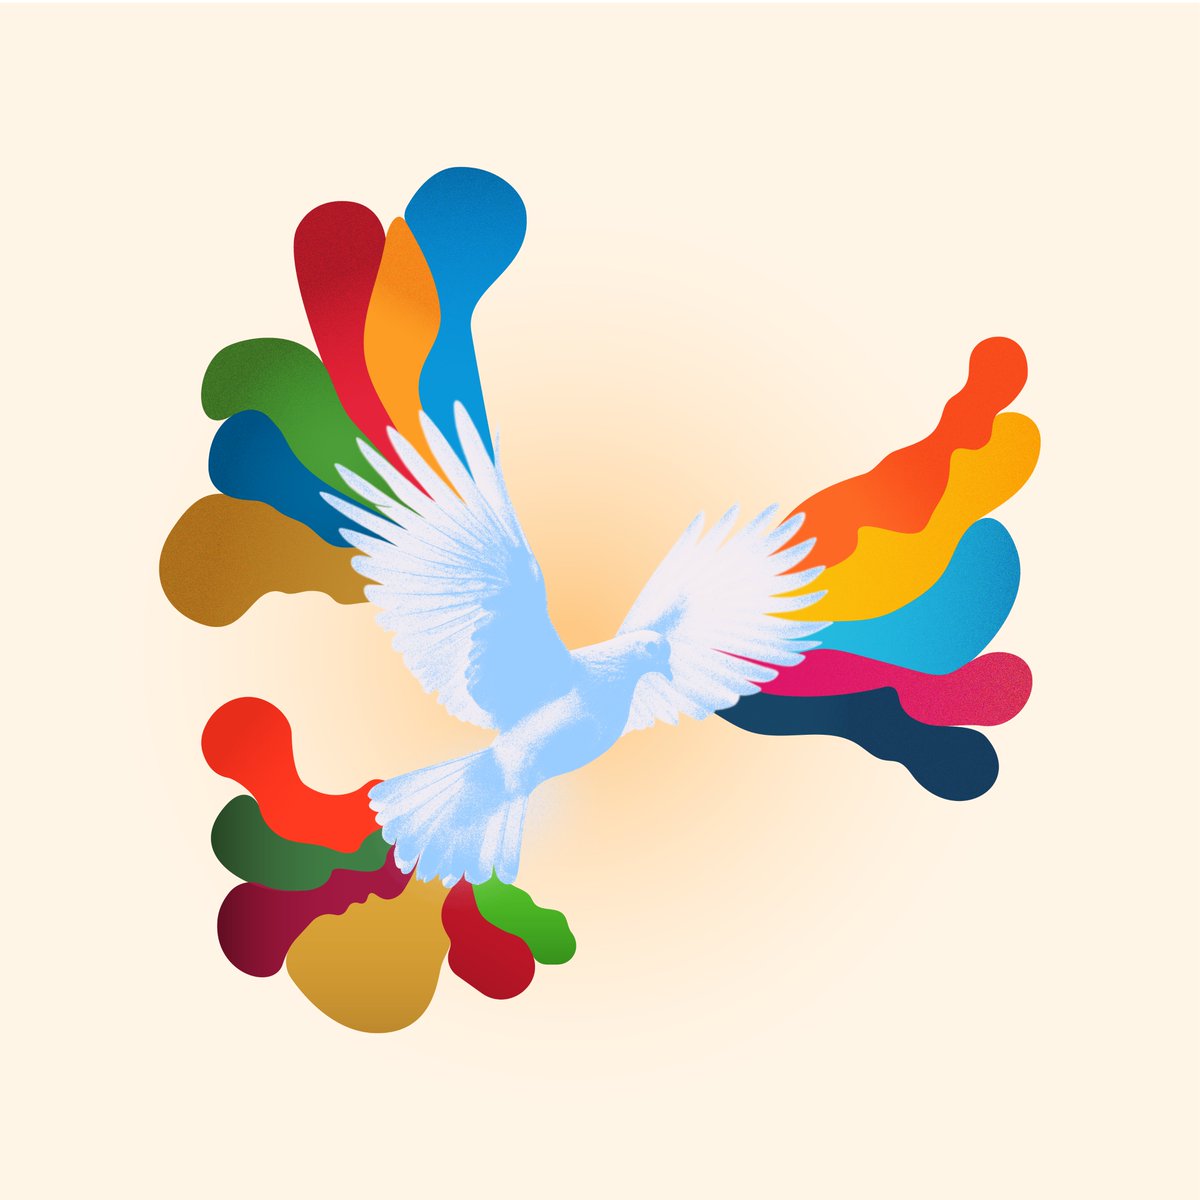 “Actions for Peace: Our Ambition for the Global Goals.” is International Day of Peace 2023 theme and it #call2action to recognize individual & collective responsibility to #fosterpeace.#Peaceday, #sustainingpeace, #InternationalDayofPeace, #21September, #Actions4peace, #Peace4all